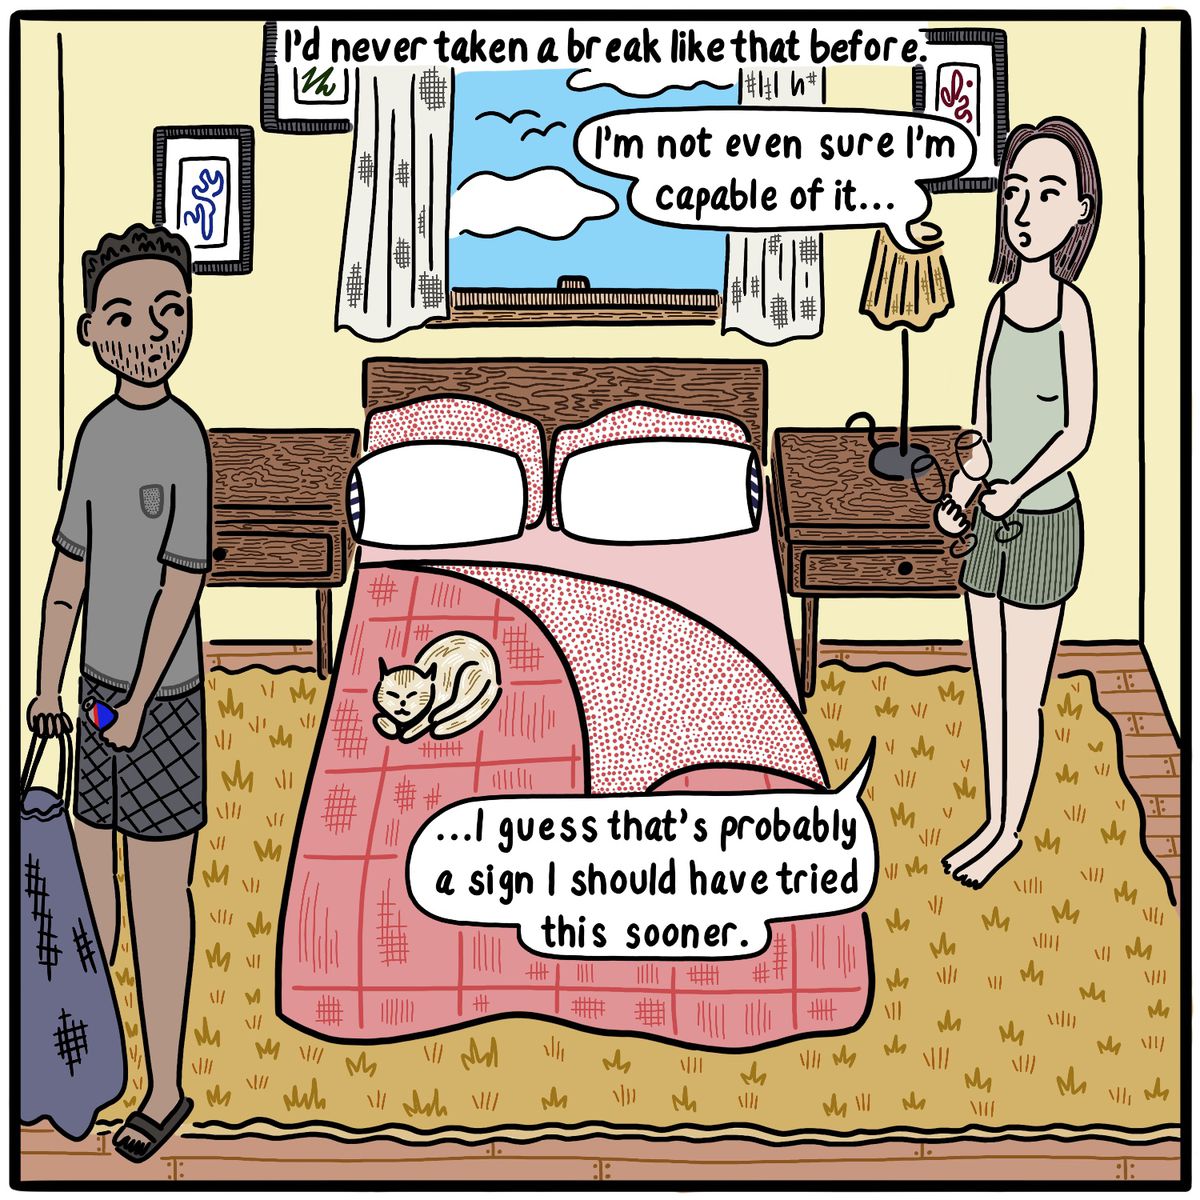 Man and woman in a bedroom. Caption reads “I’d never taken a break like that before.” Woman says, “I’m not sure I’m even capable of it…I guess that’s probably a sign I should have tried this sooner.”